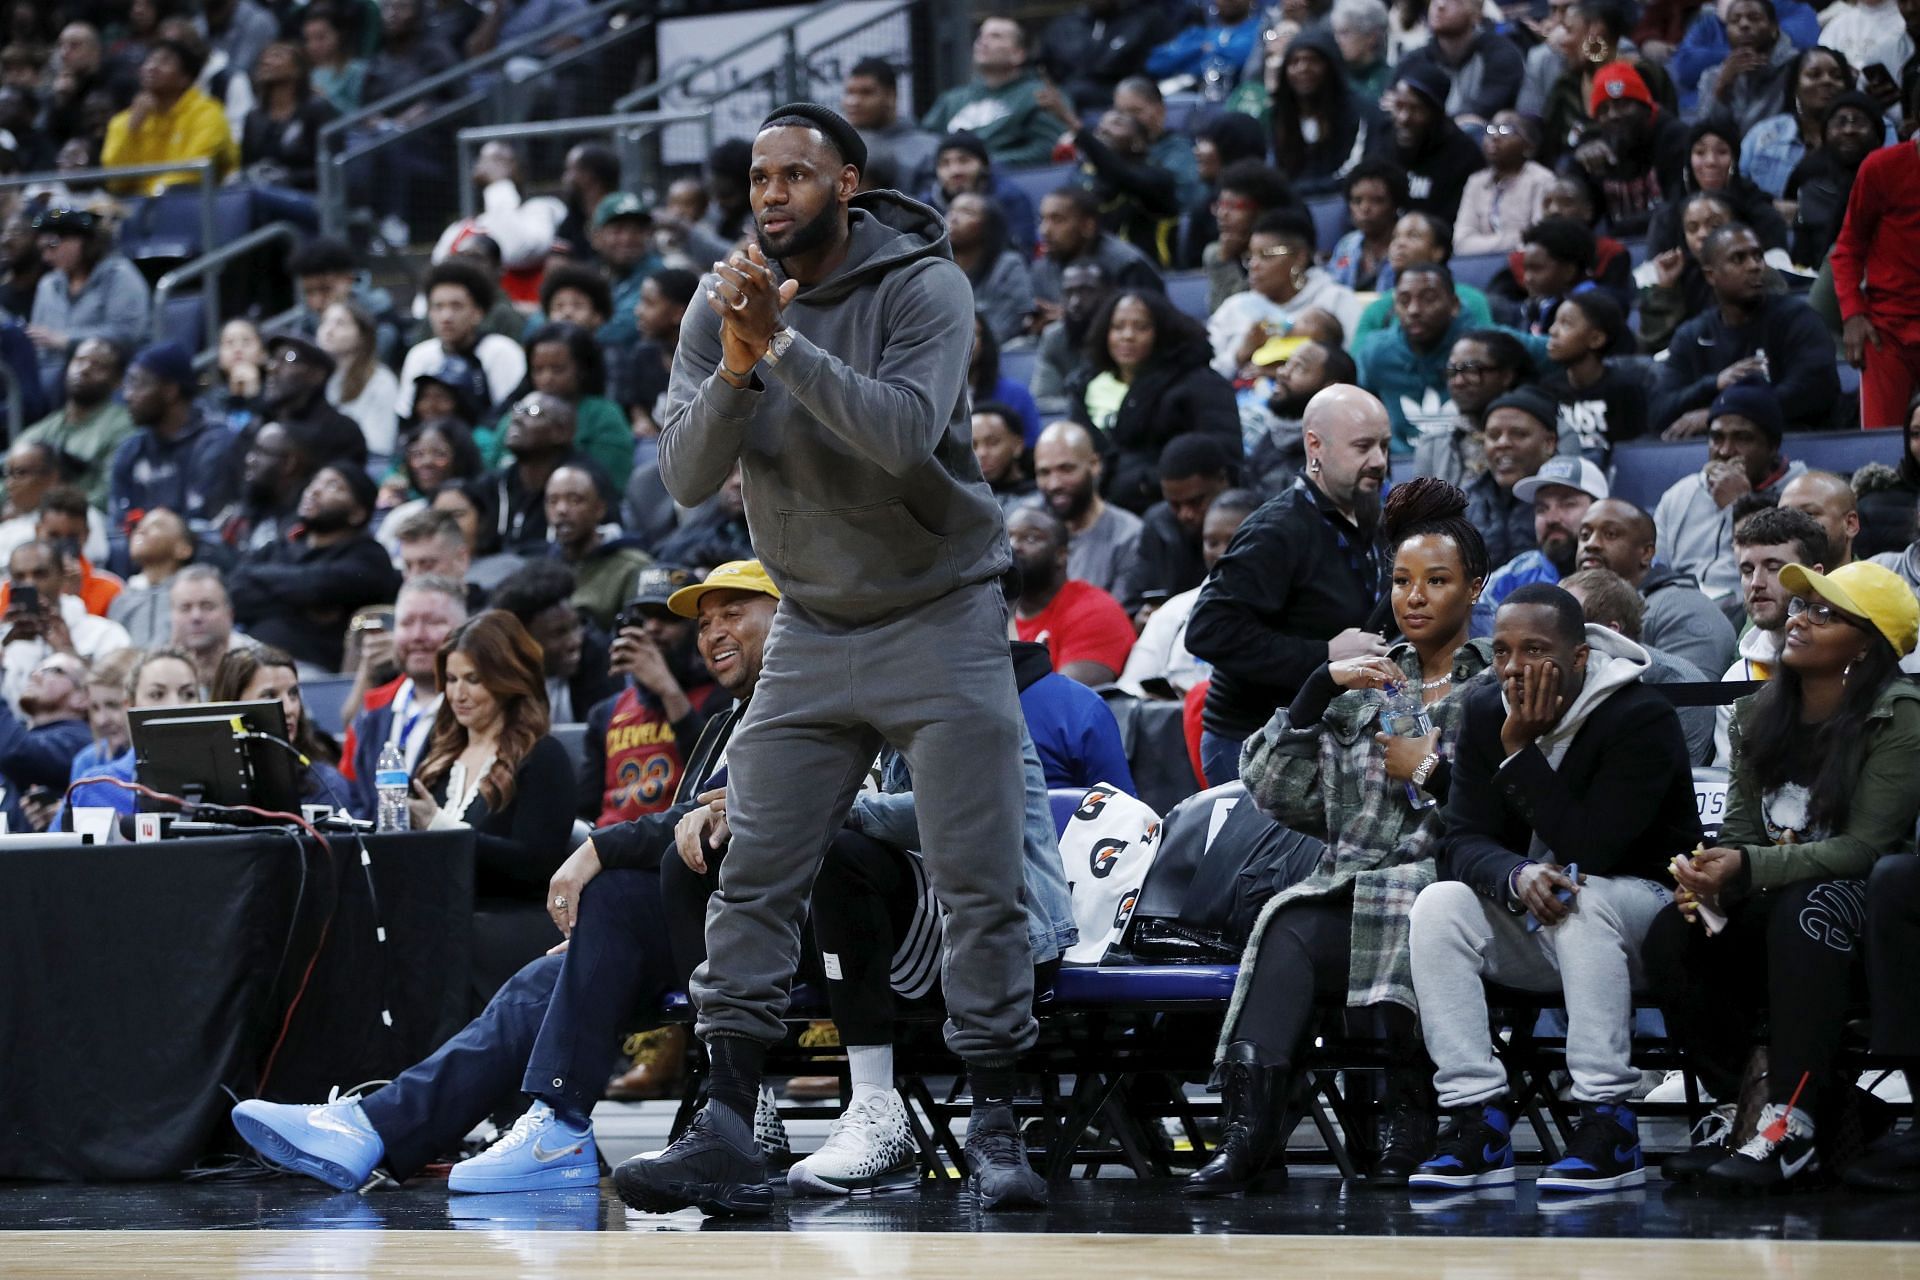 LeBron James of the Los Angeles Lakers reacts while watching his son Bronny play